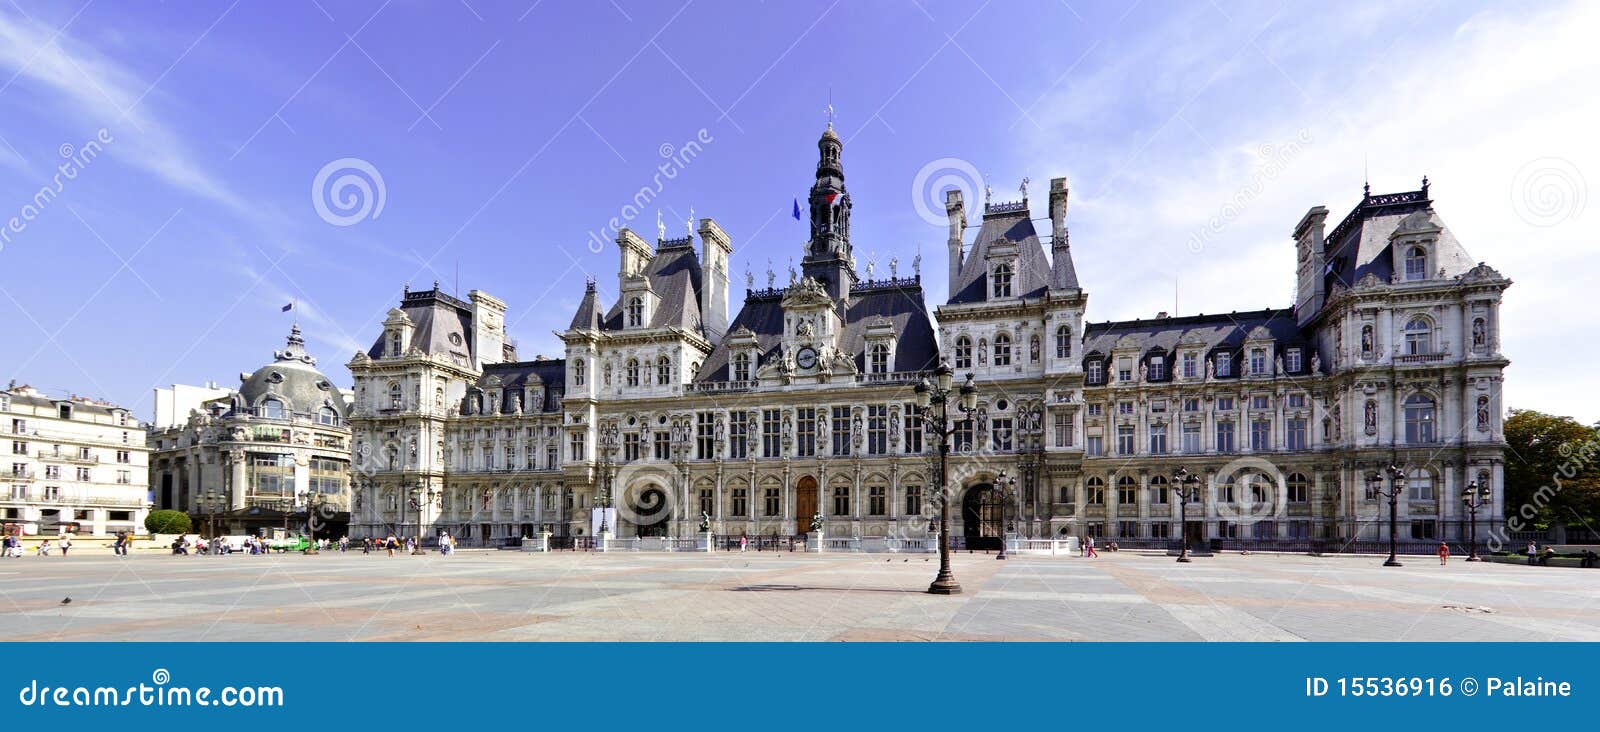 Town hall of Paris stock photo. Image of capital, building - 15536916